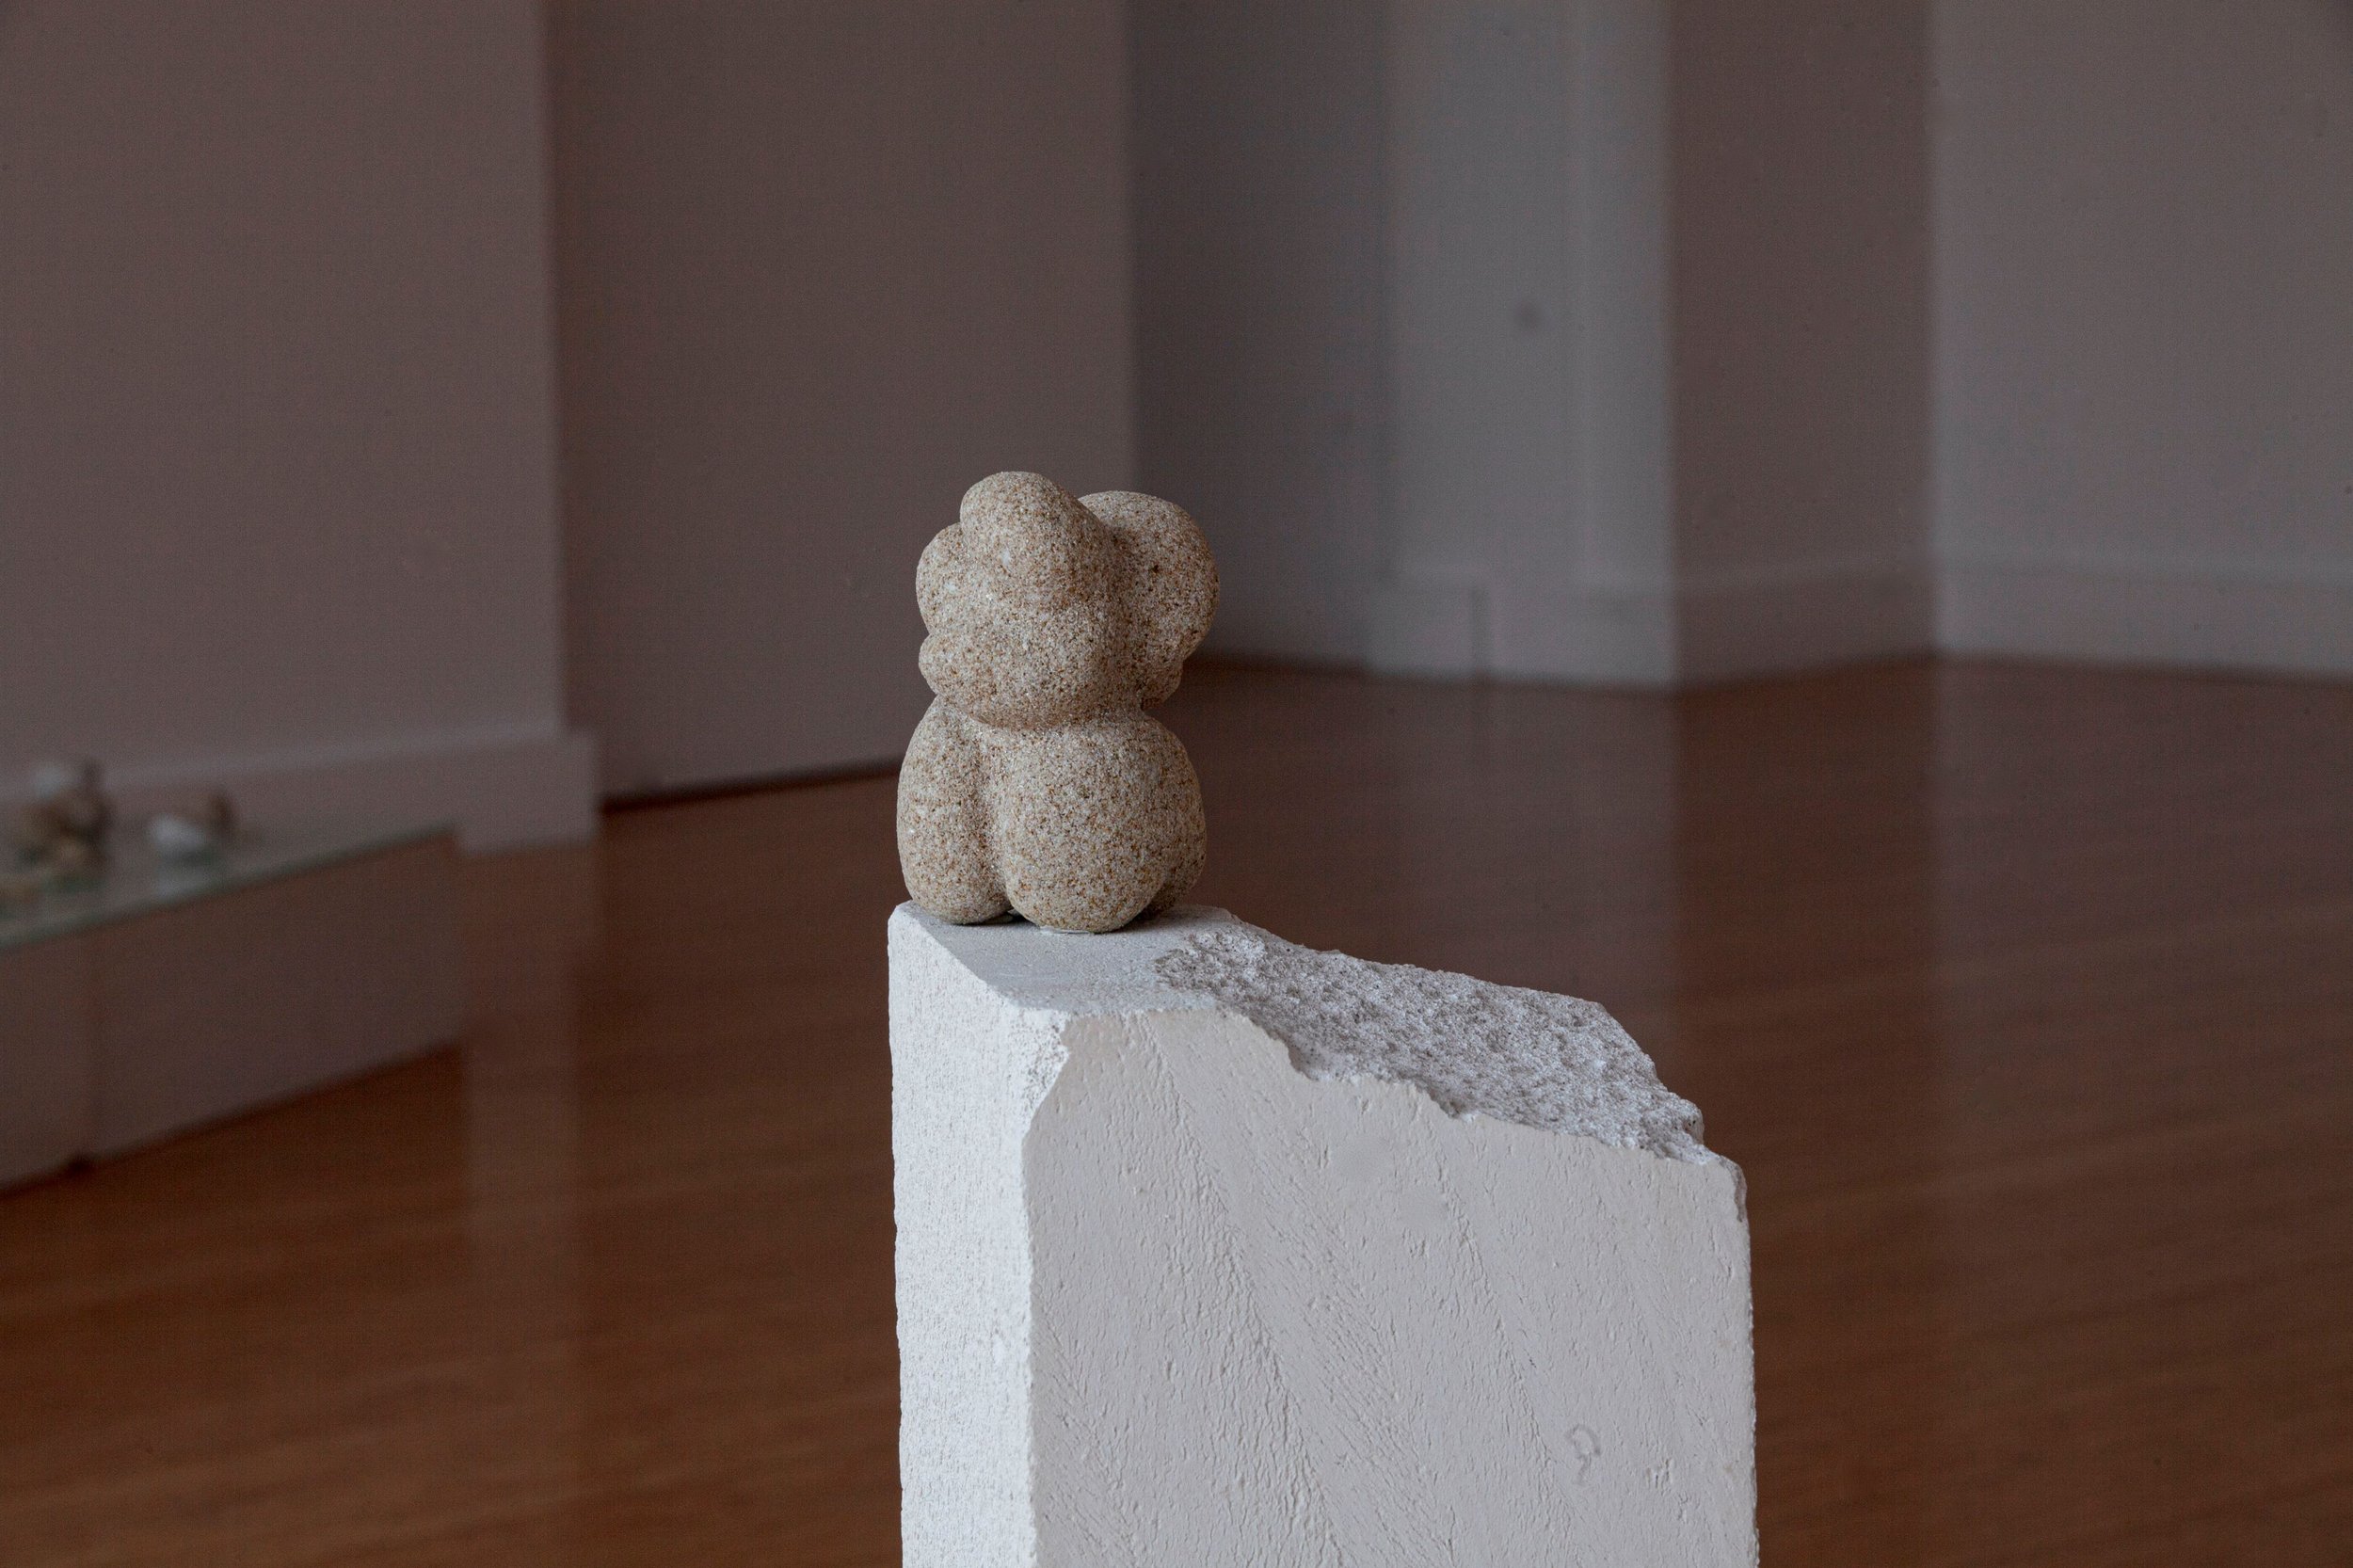 Narelle-White_Salty-Bodies-Sculpture_MG_0398 NW-2 small.jpg